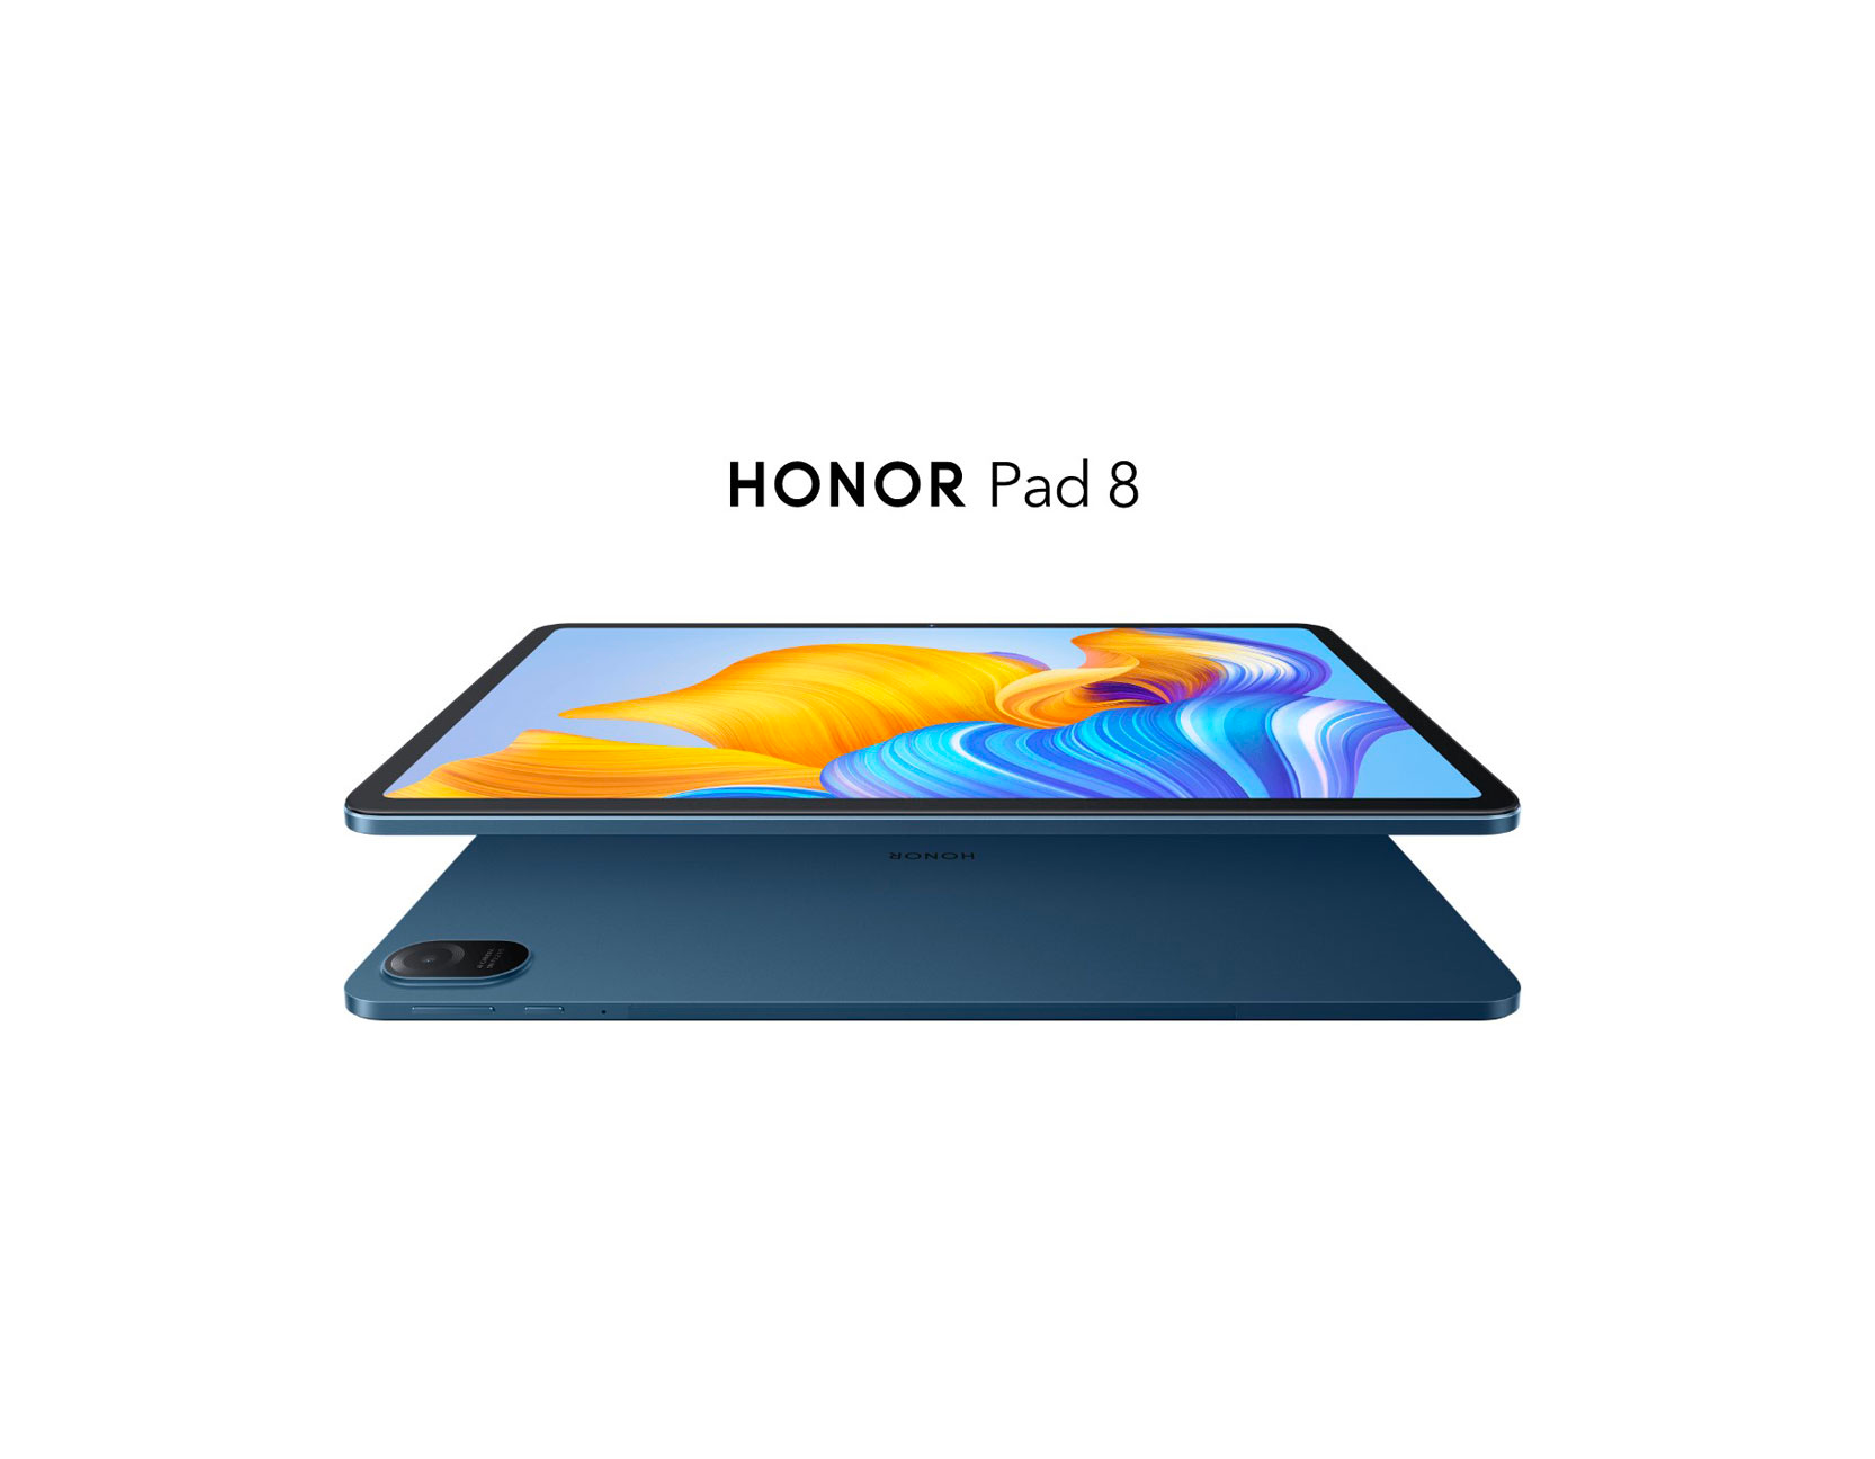 Huawei’s Honor brand may return to India with the Pad 8 – A mid-range tablet